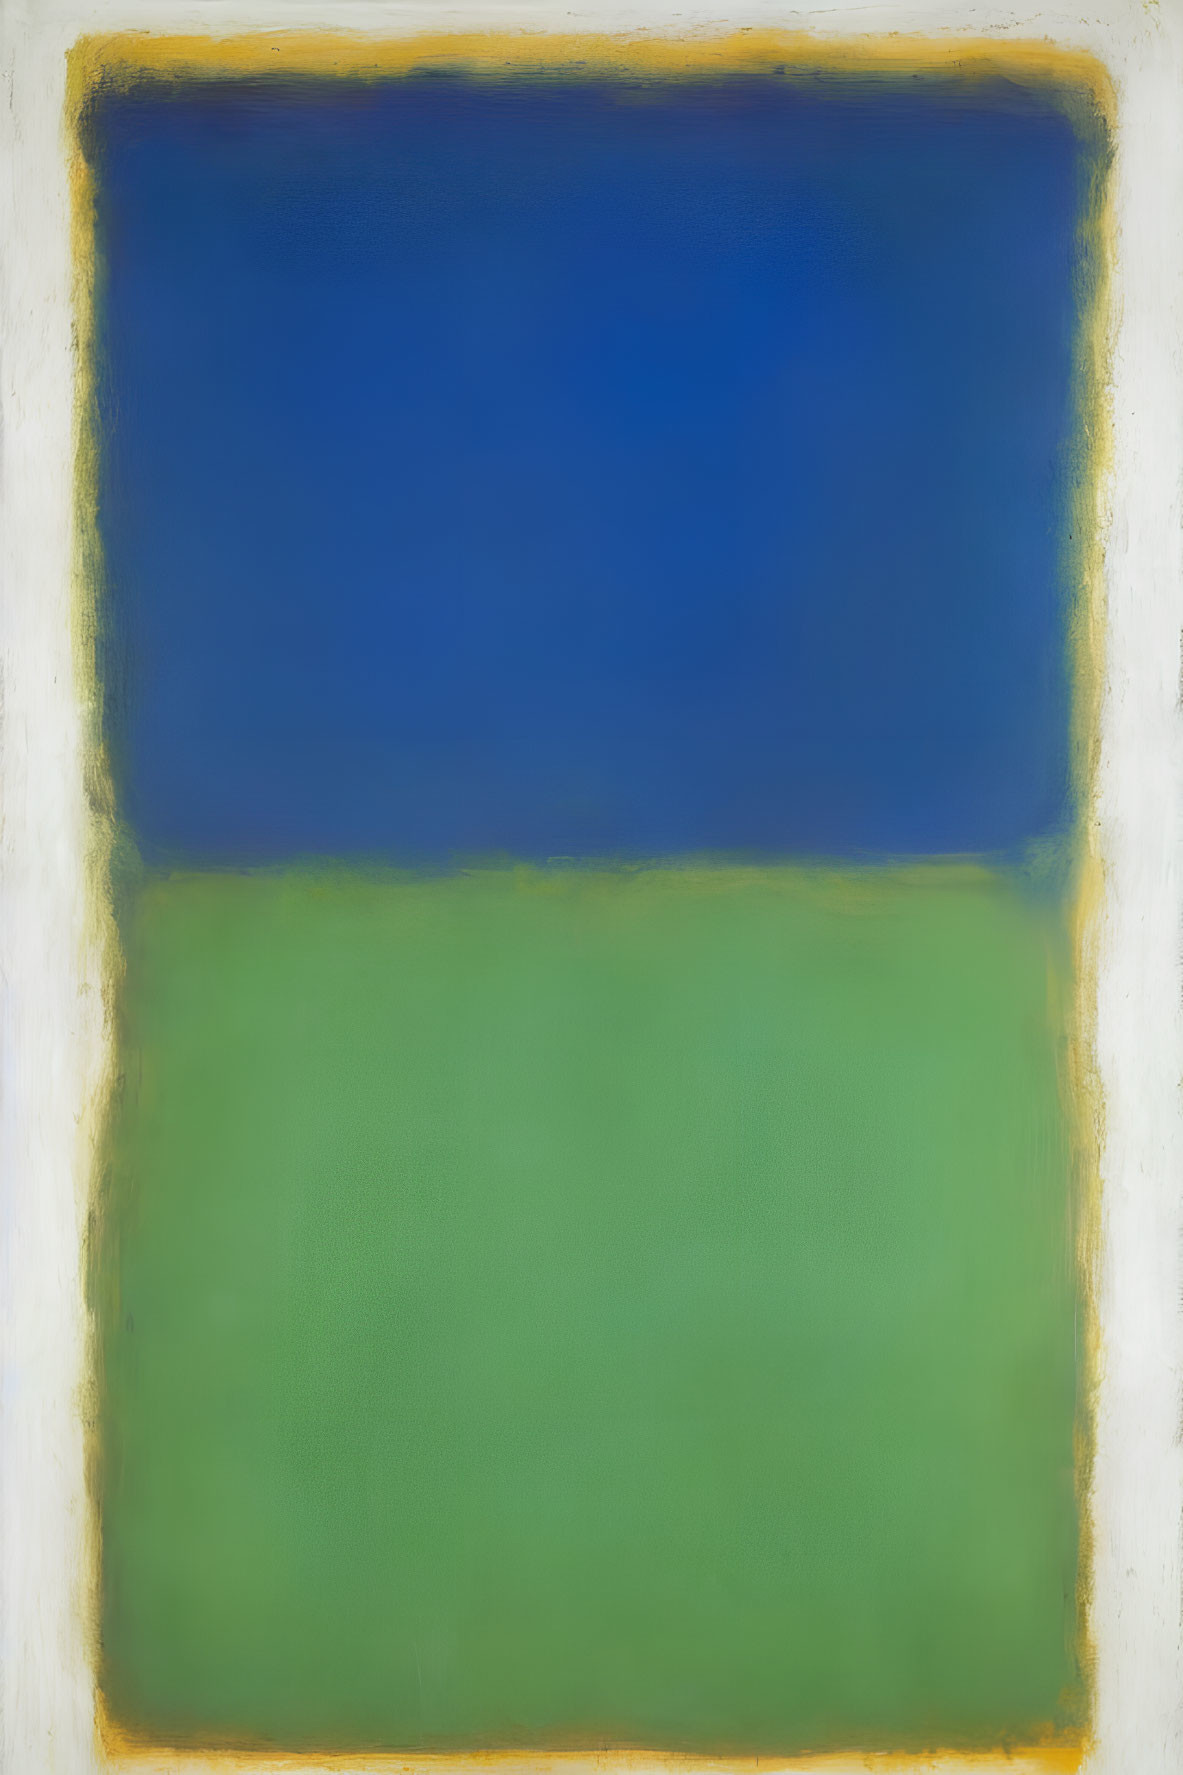 Abstract painting: Large blue and green rectangles with yellow borders on white background